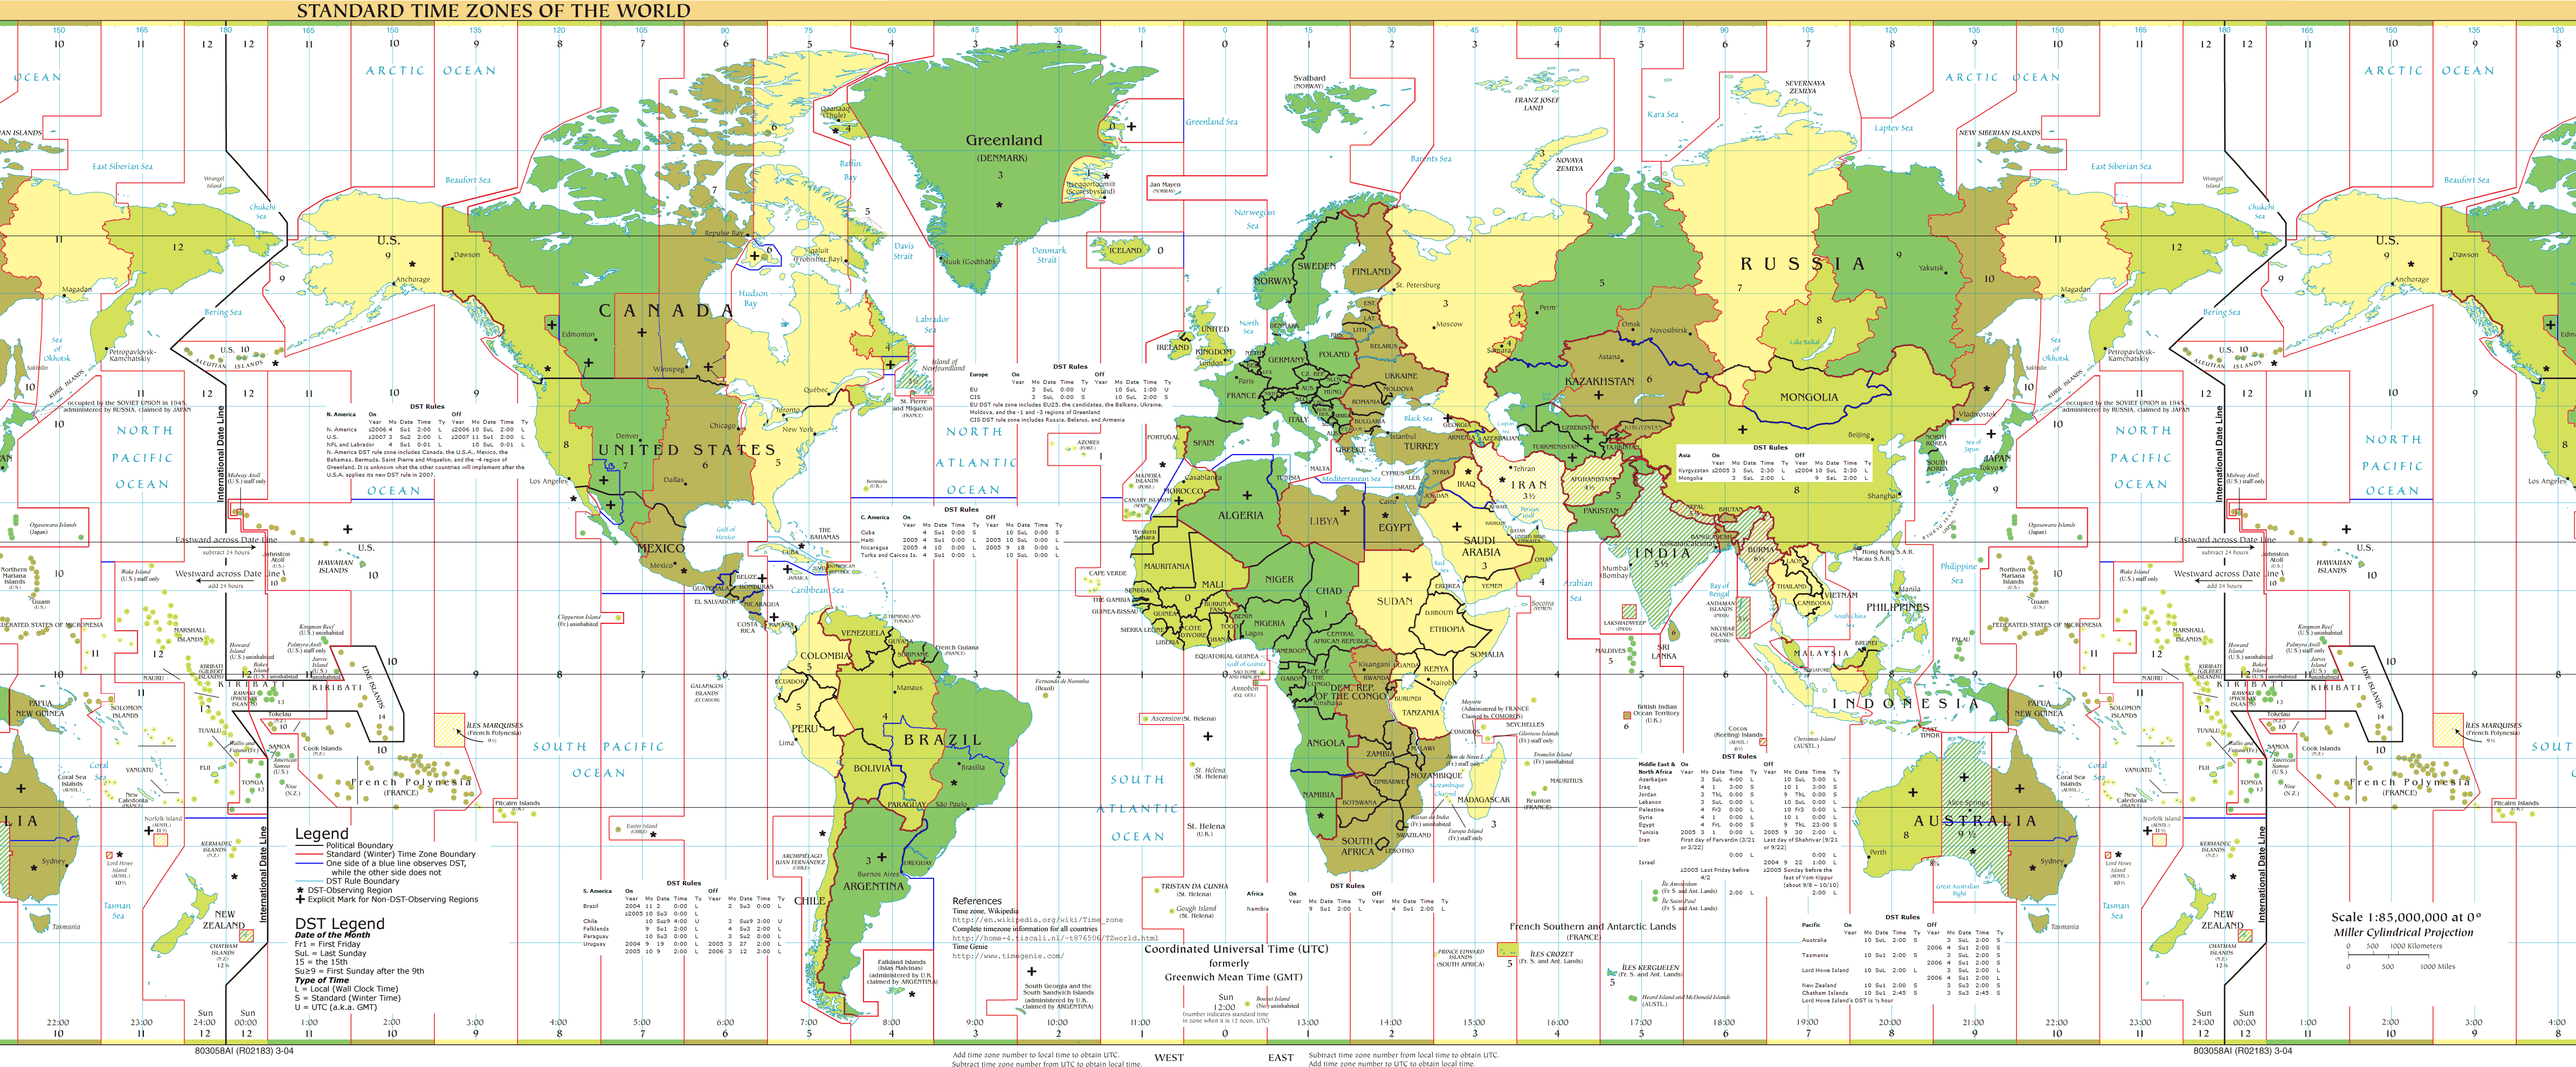 World Standard Time Zones Map